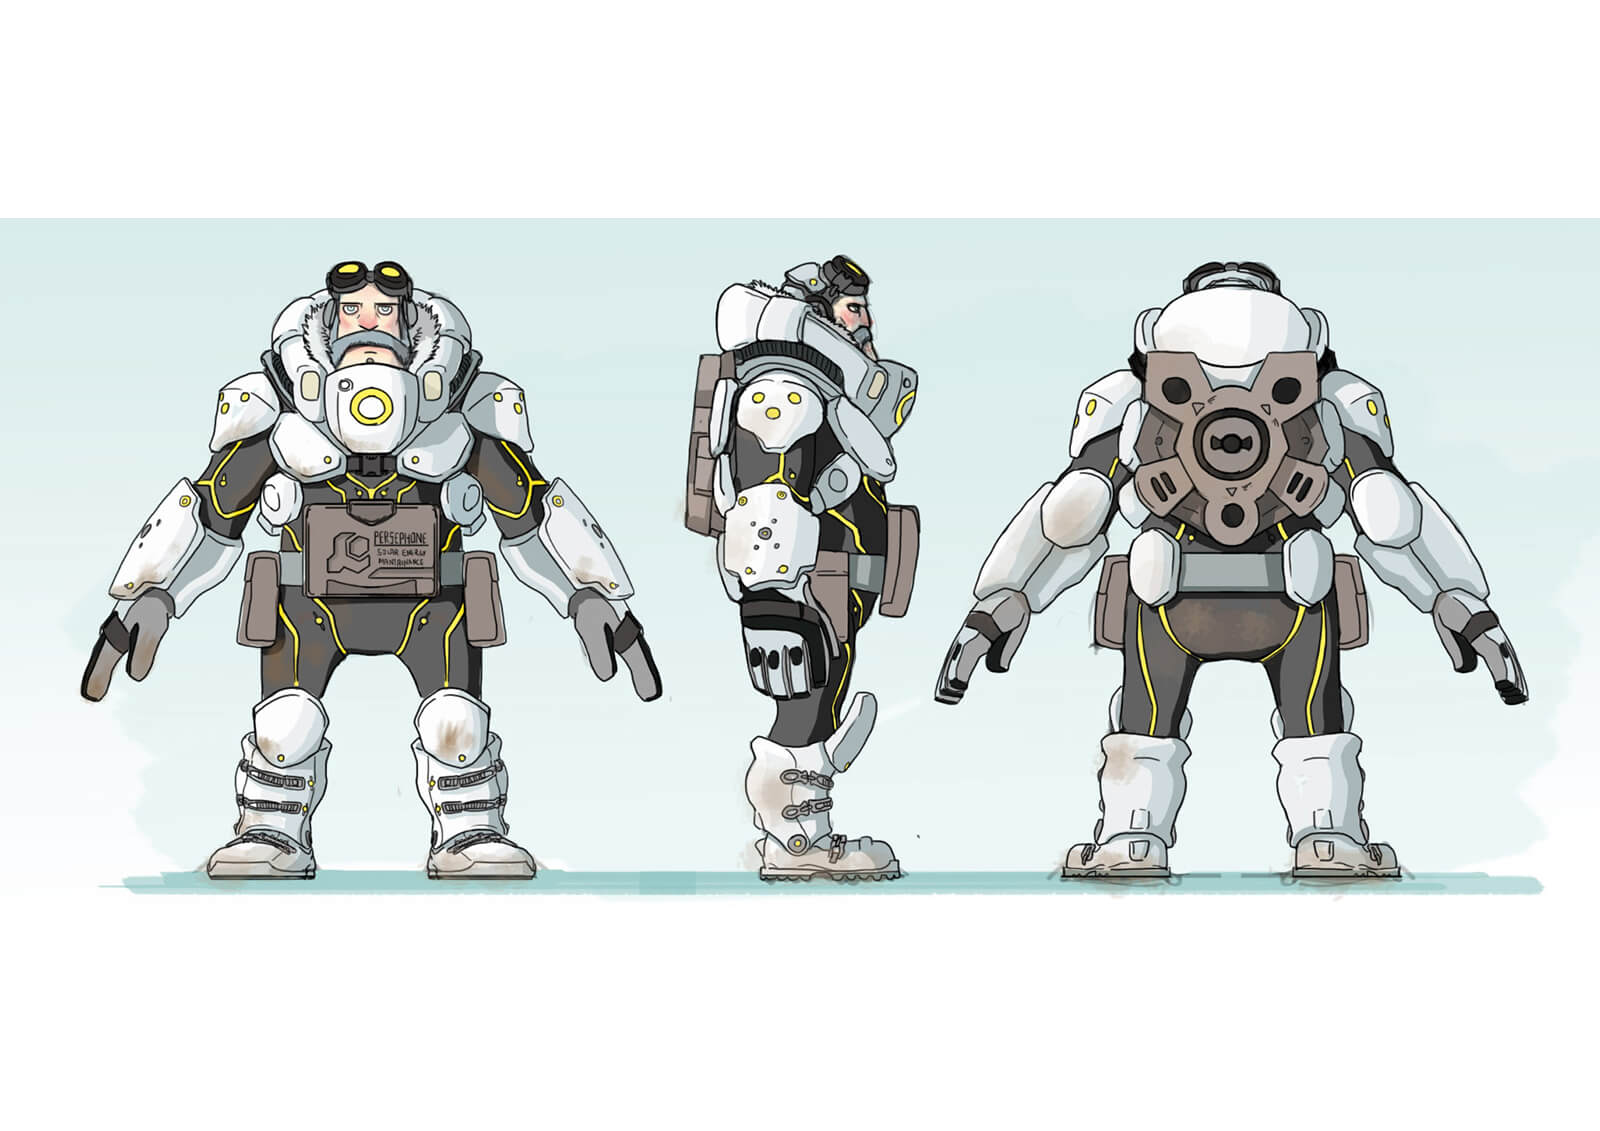 Concept color drawing of a bearded man in goggles and white and black futuristic armor accented with yellow lighting